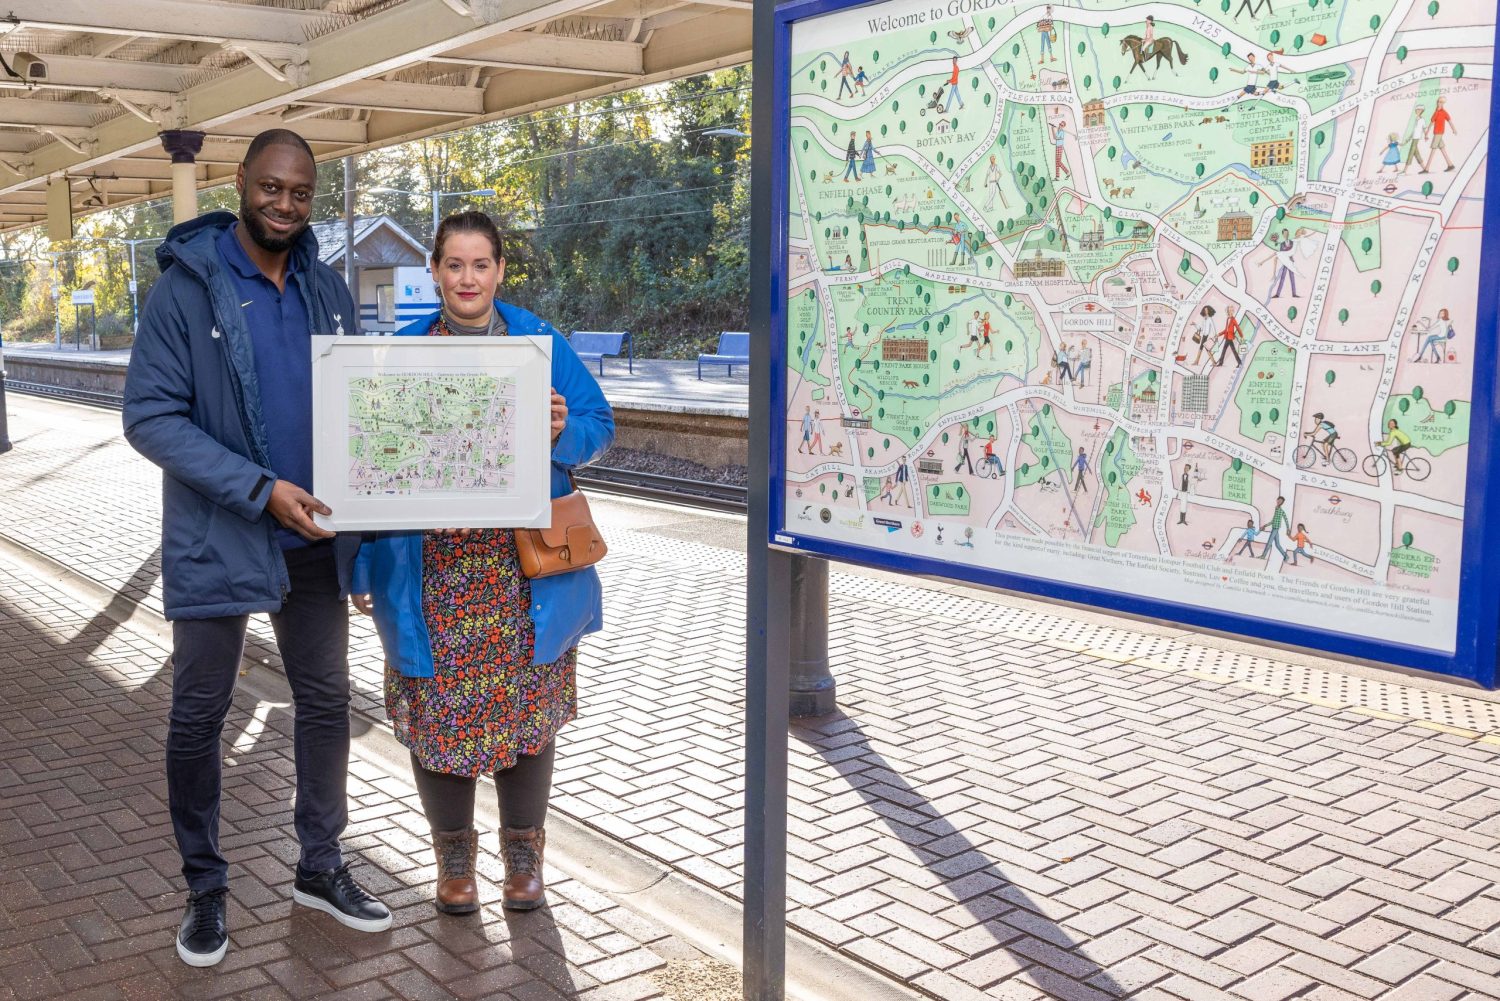 Ledley King is present with a framed copy of the community map by Whitewebbs councillor Hannah Dyson